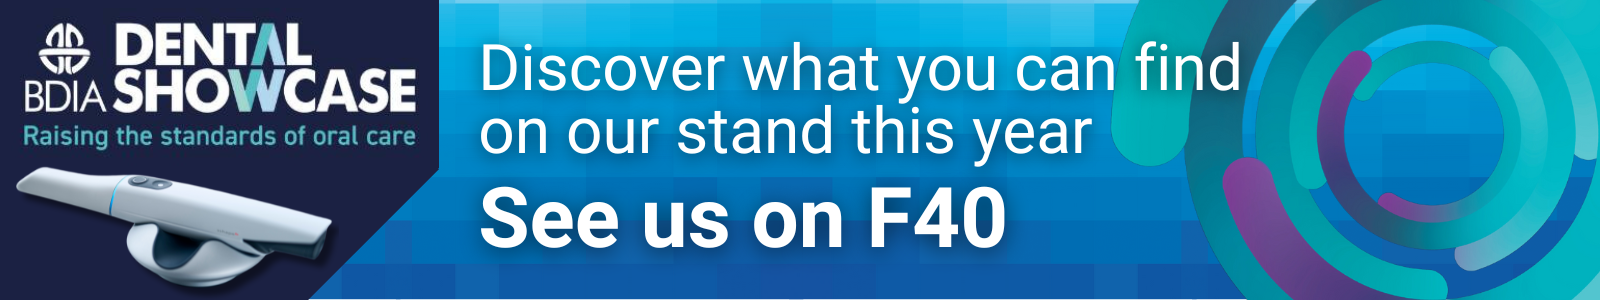 BDIA Dental Showcase - Discover what you can find on our stand this year - See us on F40